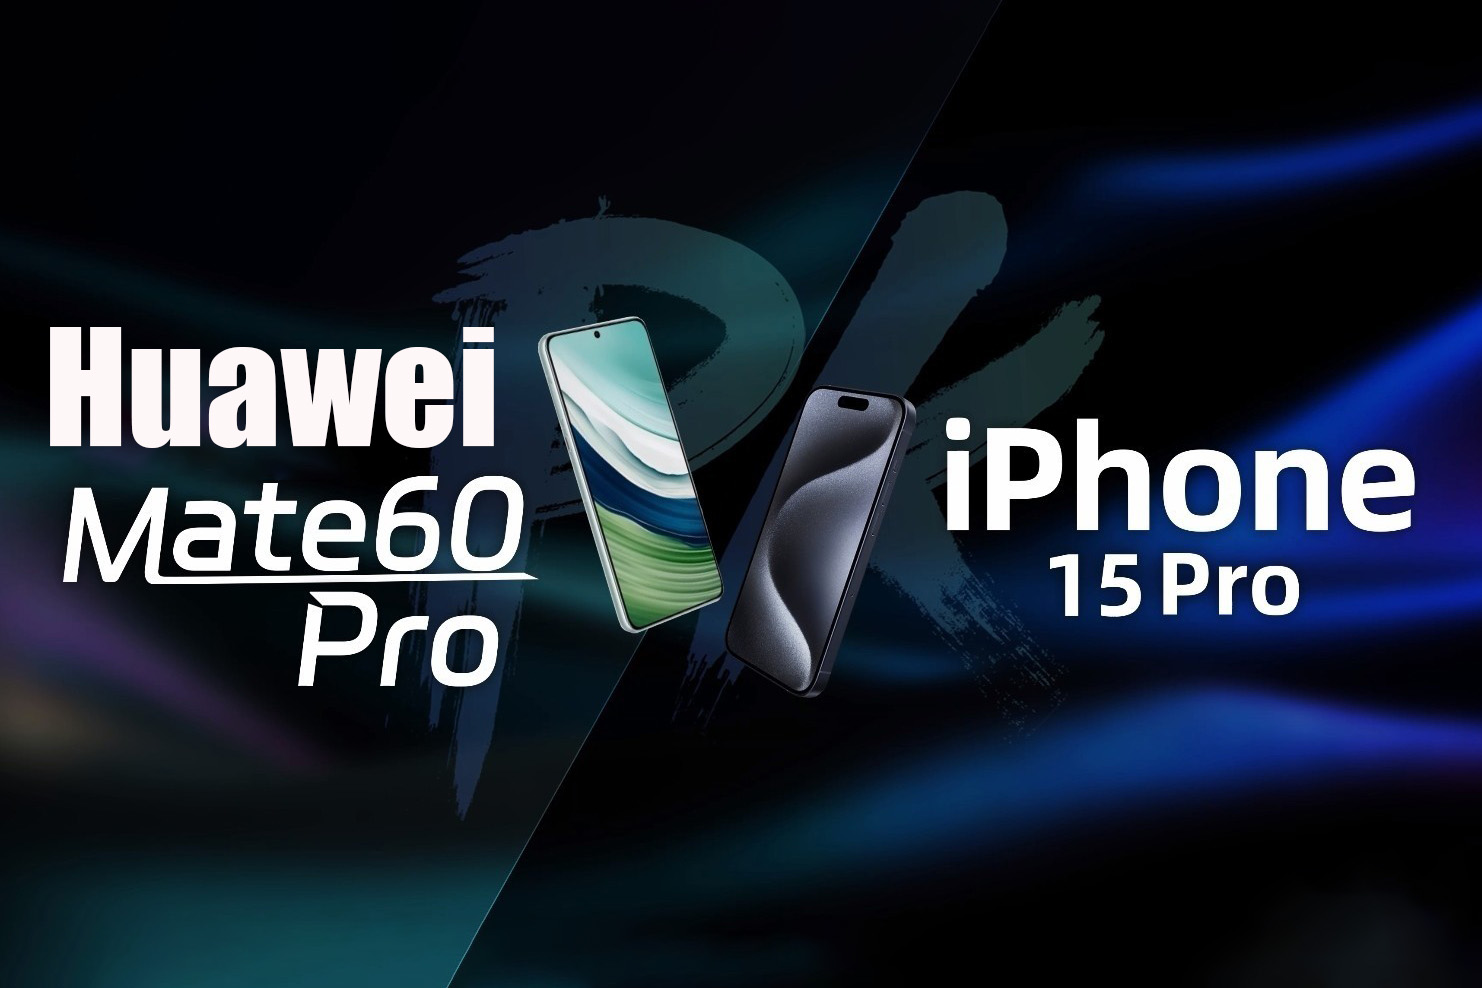 iPhone 15 Pro vs Huawei Mate 60 Pro Comparison Review